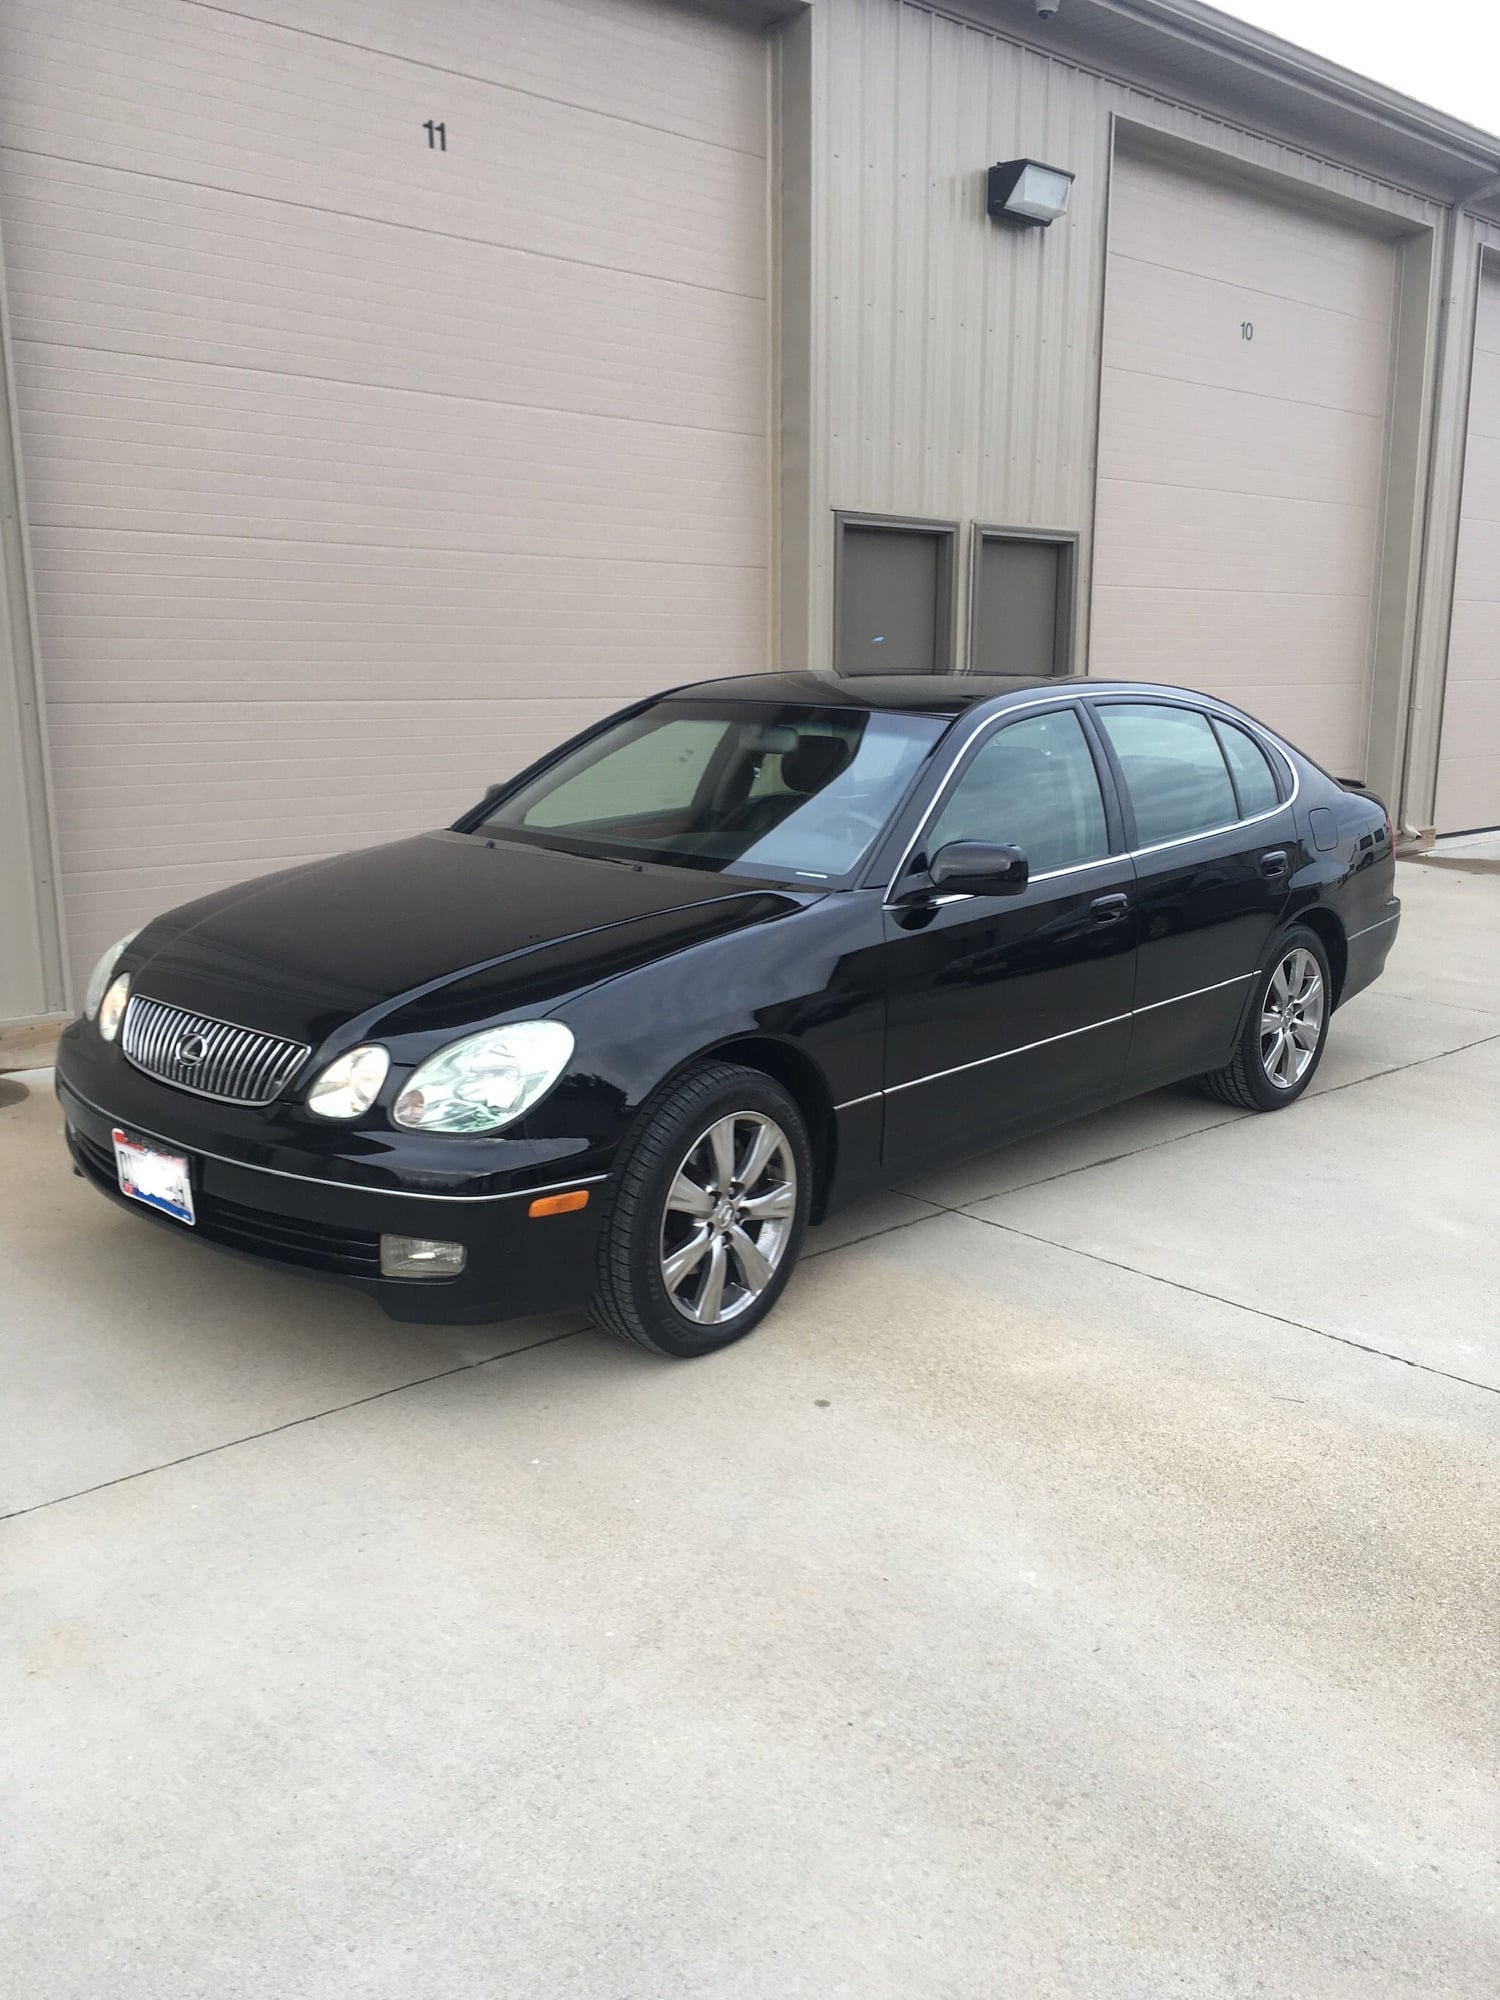 2002 Lexus GS300 - Very Clean GS300 143k black on black combo, never winter driven - Used - VIN JT8BD69S620154816 - 143,373 Miles - 6 cyl - 2WD - Automatic - Sedan - Black - Cleveland, OH 44333, United States